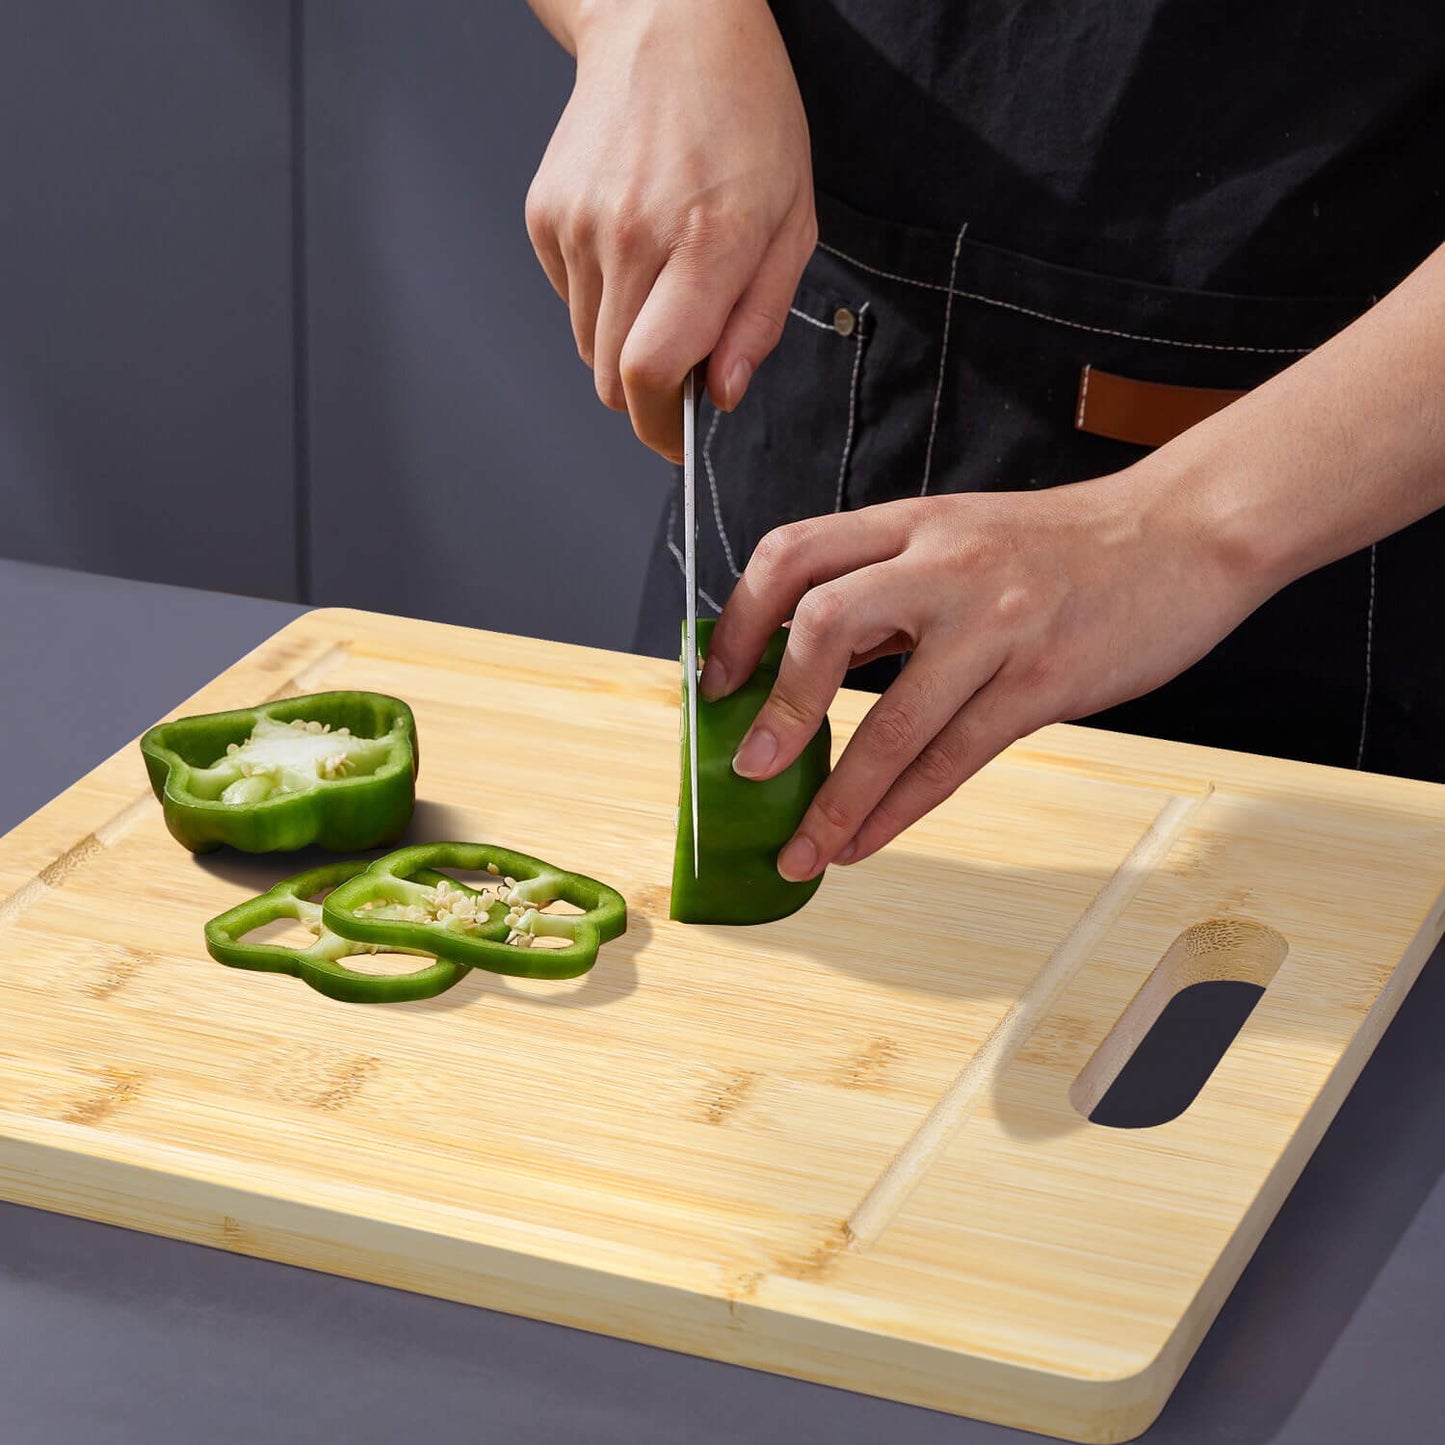 GL-Bamboo Cutting Board with Juice Groove and Handle